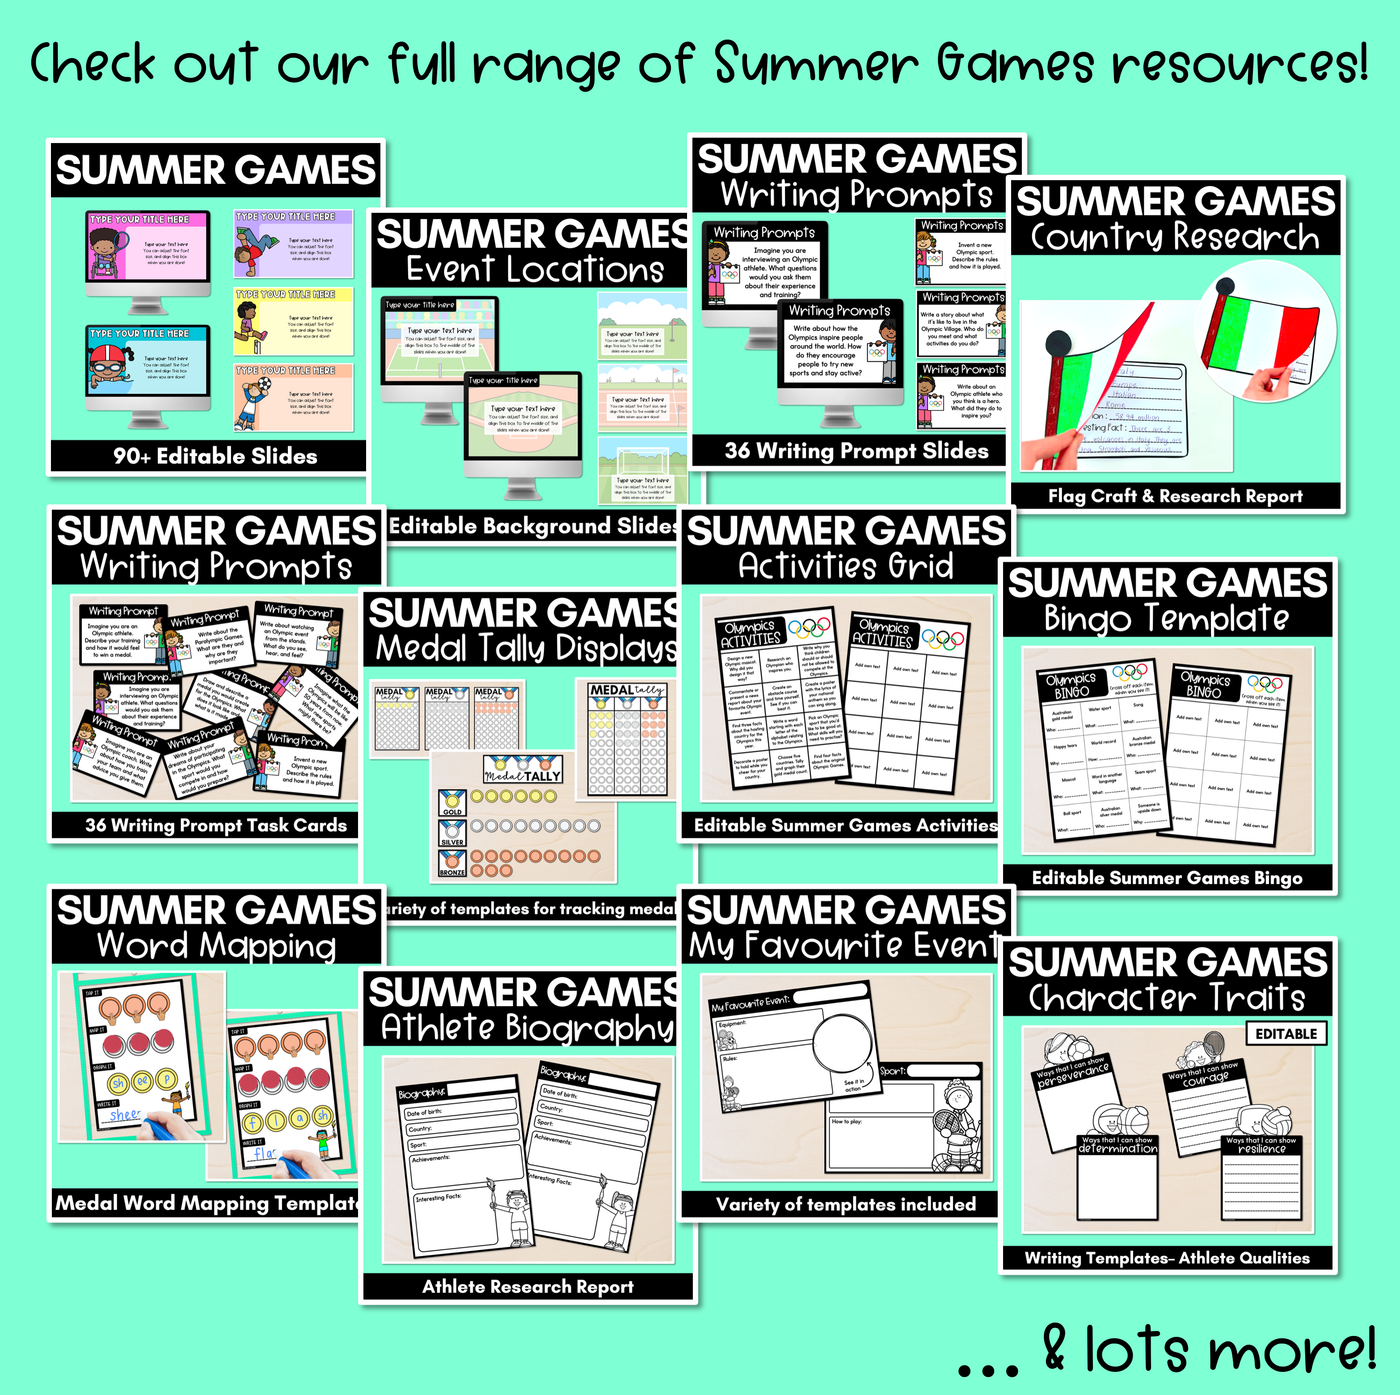 Summer Games Research Report - Athlete Biography - Summer Games Writing Templates